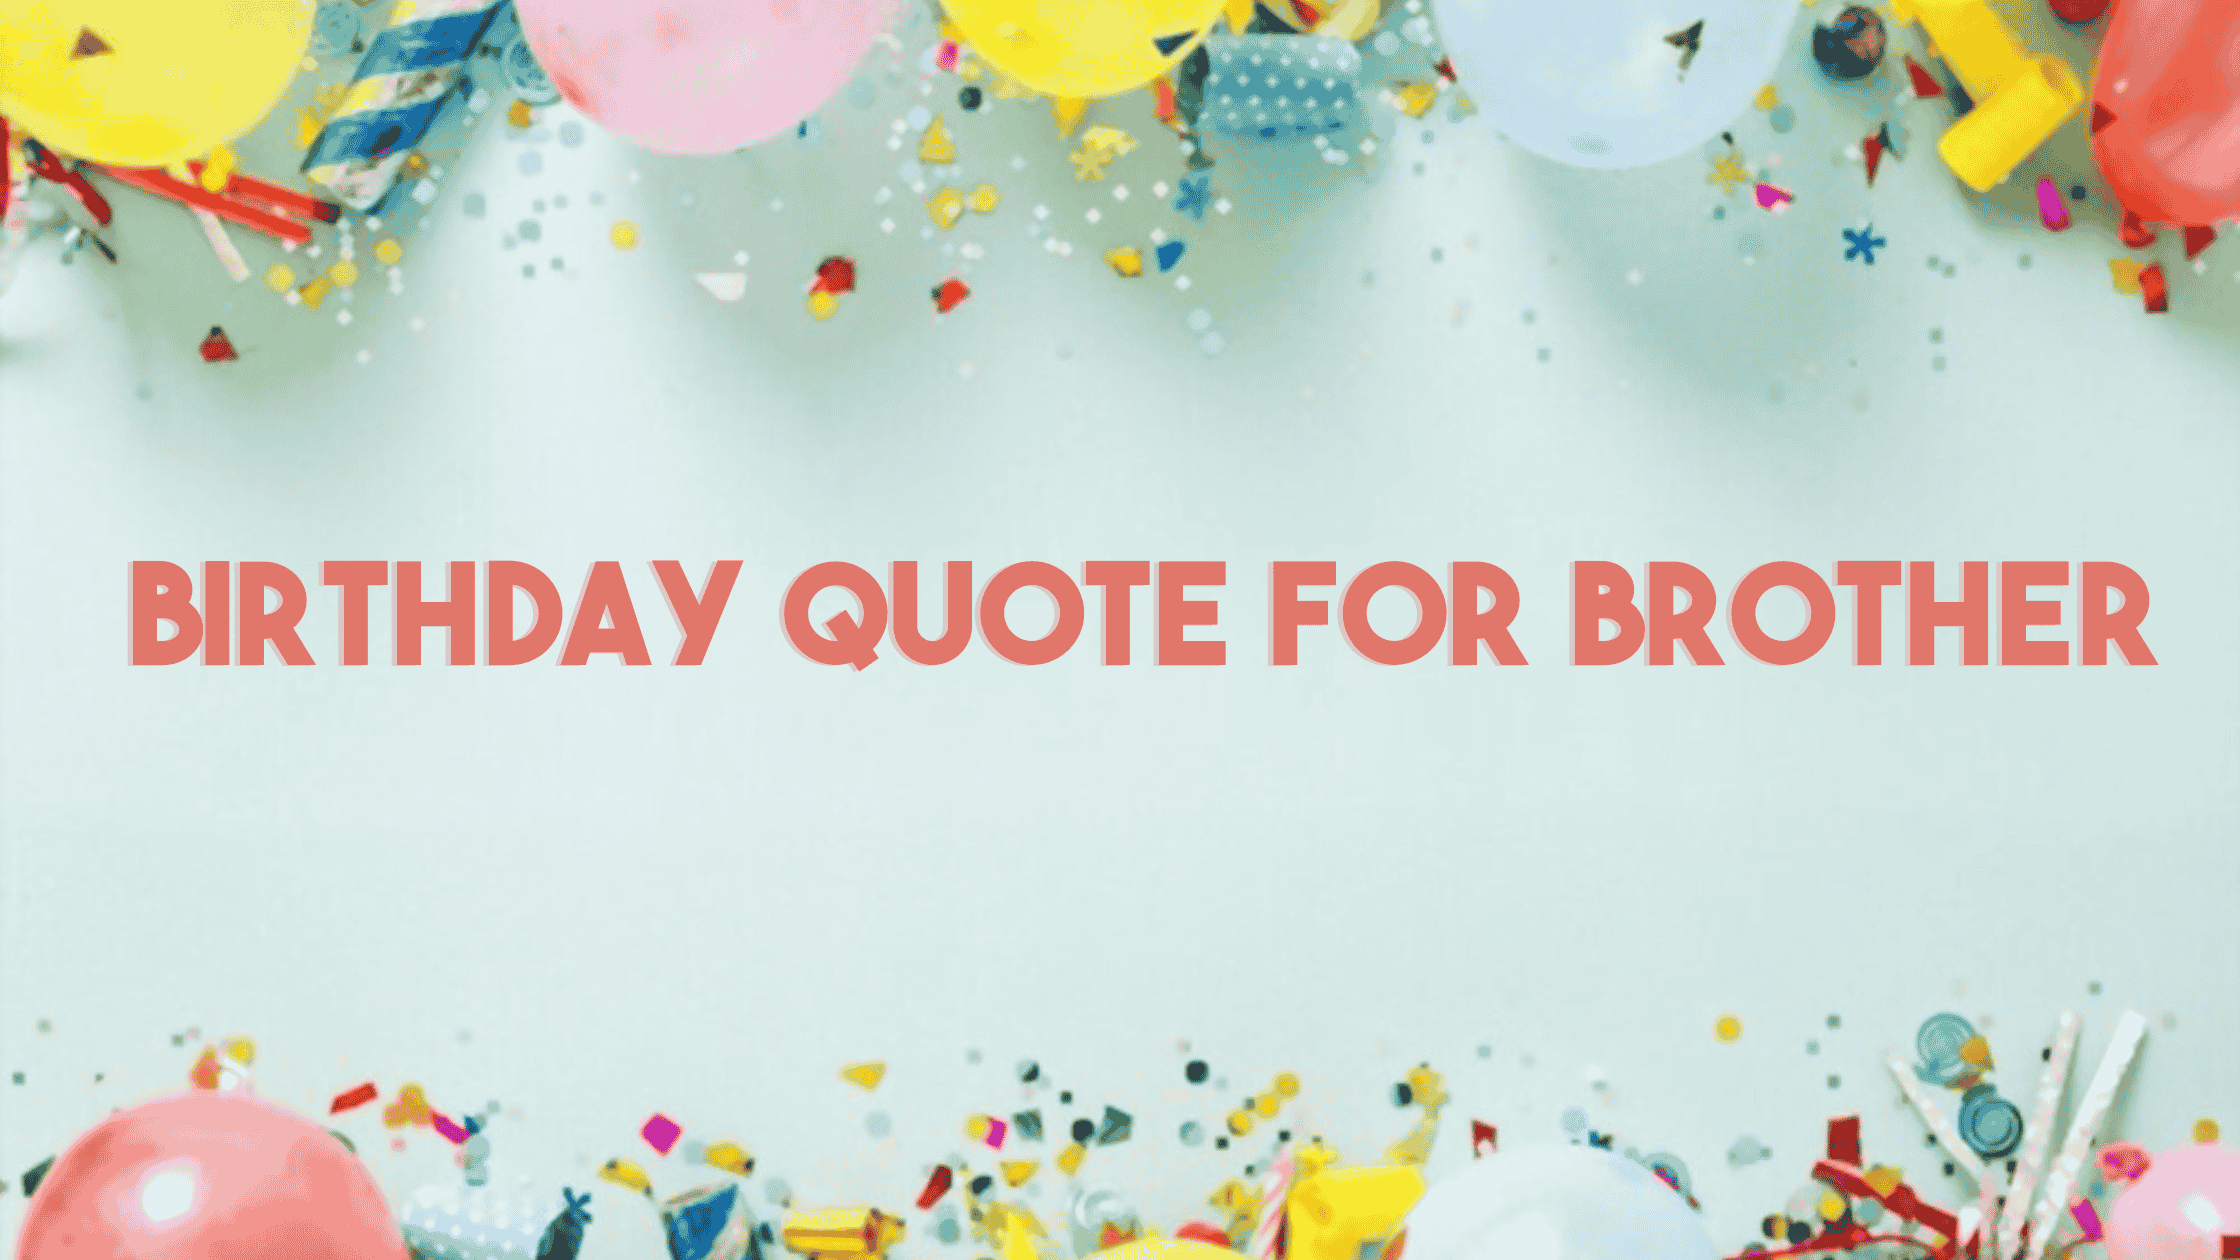 3 Uplifting Birthday Quote for Brother